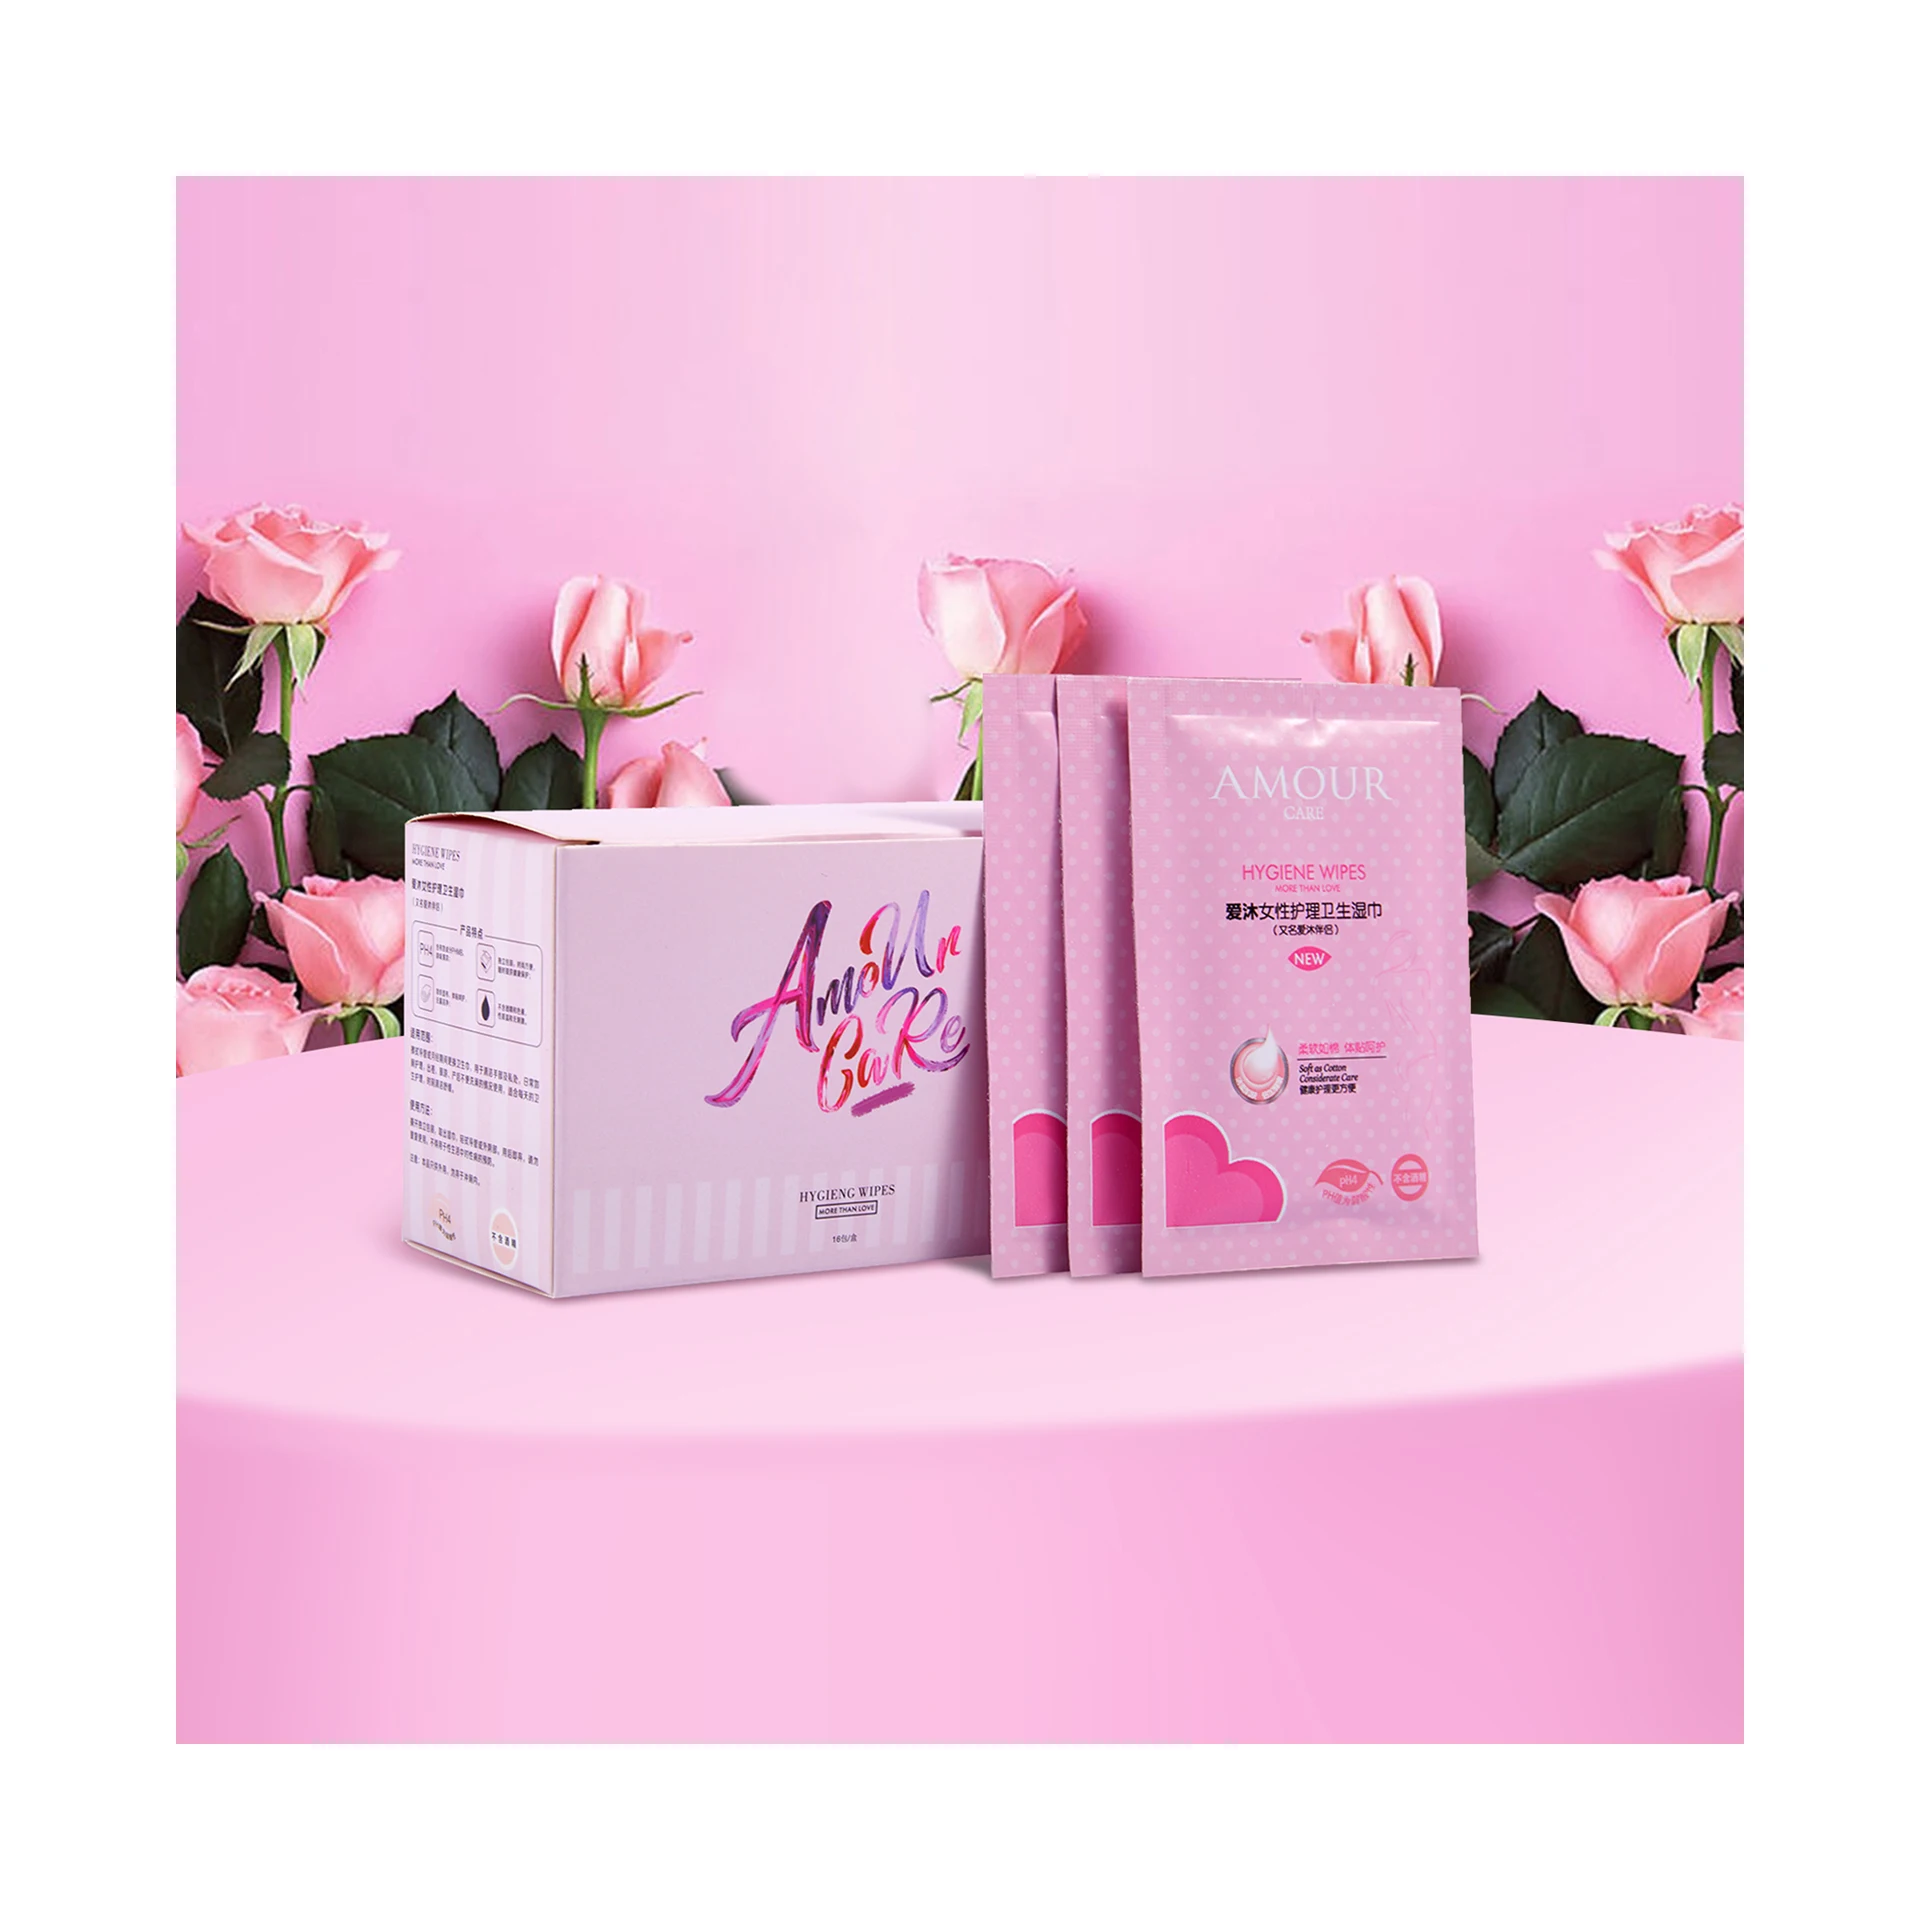 

feminine vaginal hygiene cleaning wipes 100% natural women's care wipes individually wrapped biodegradable feminine wipes